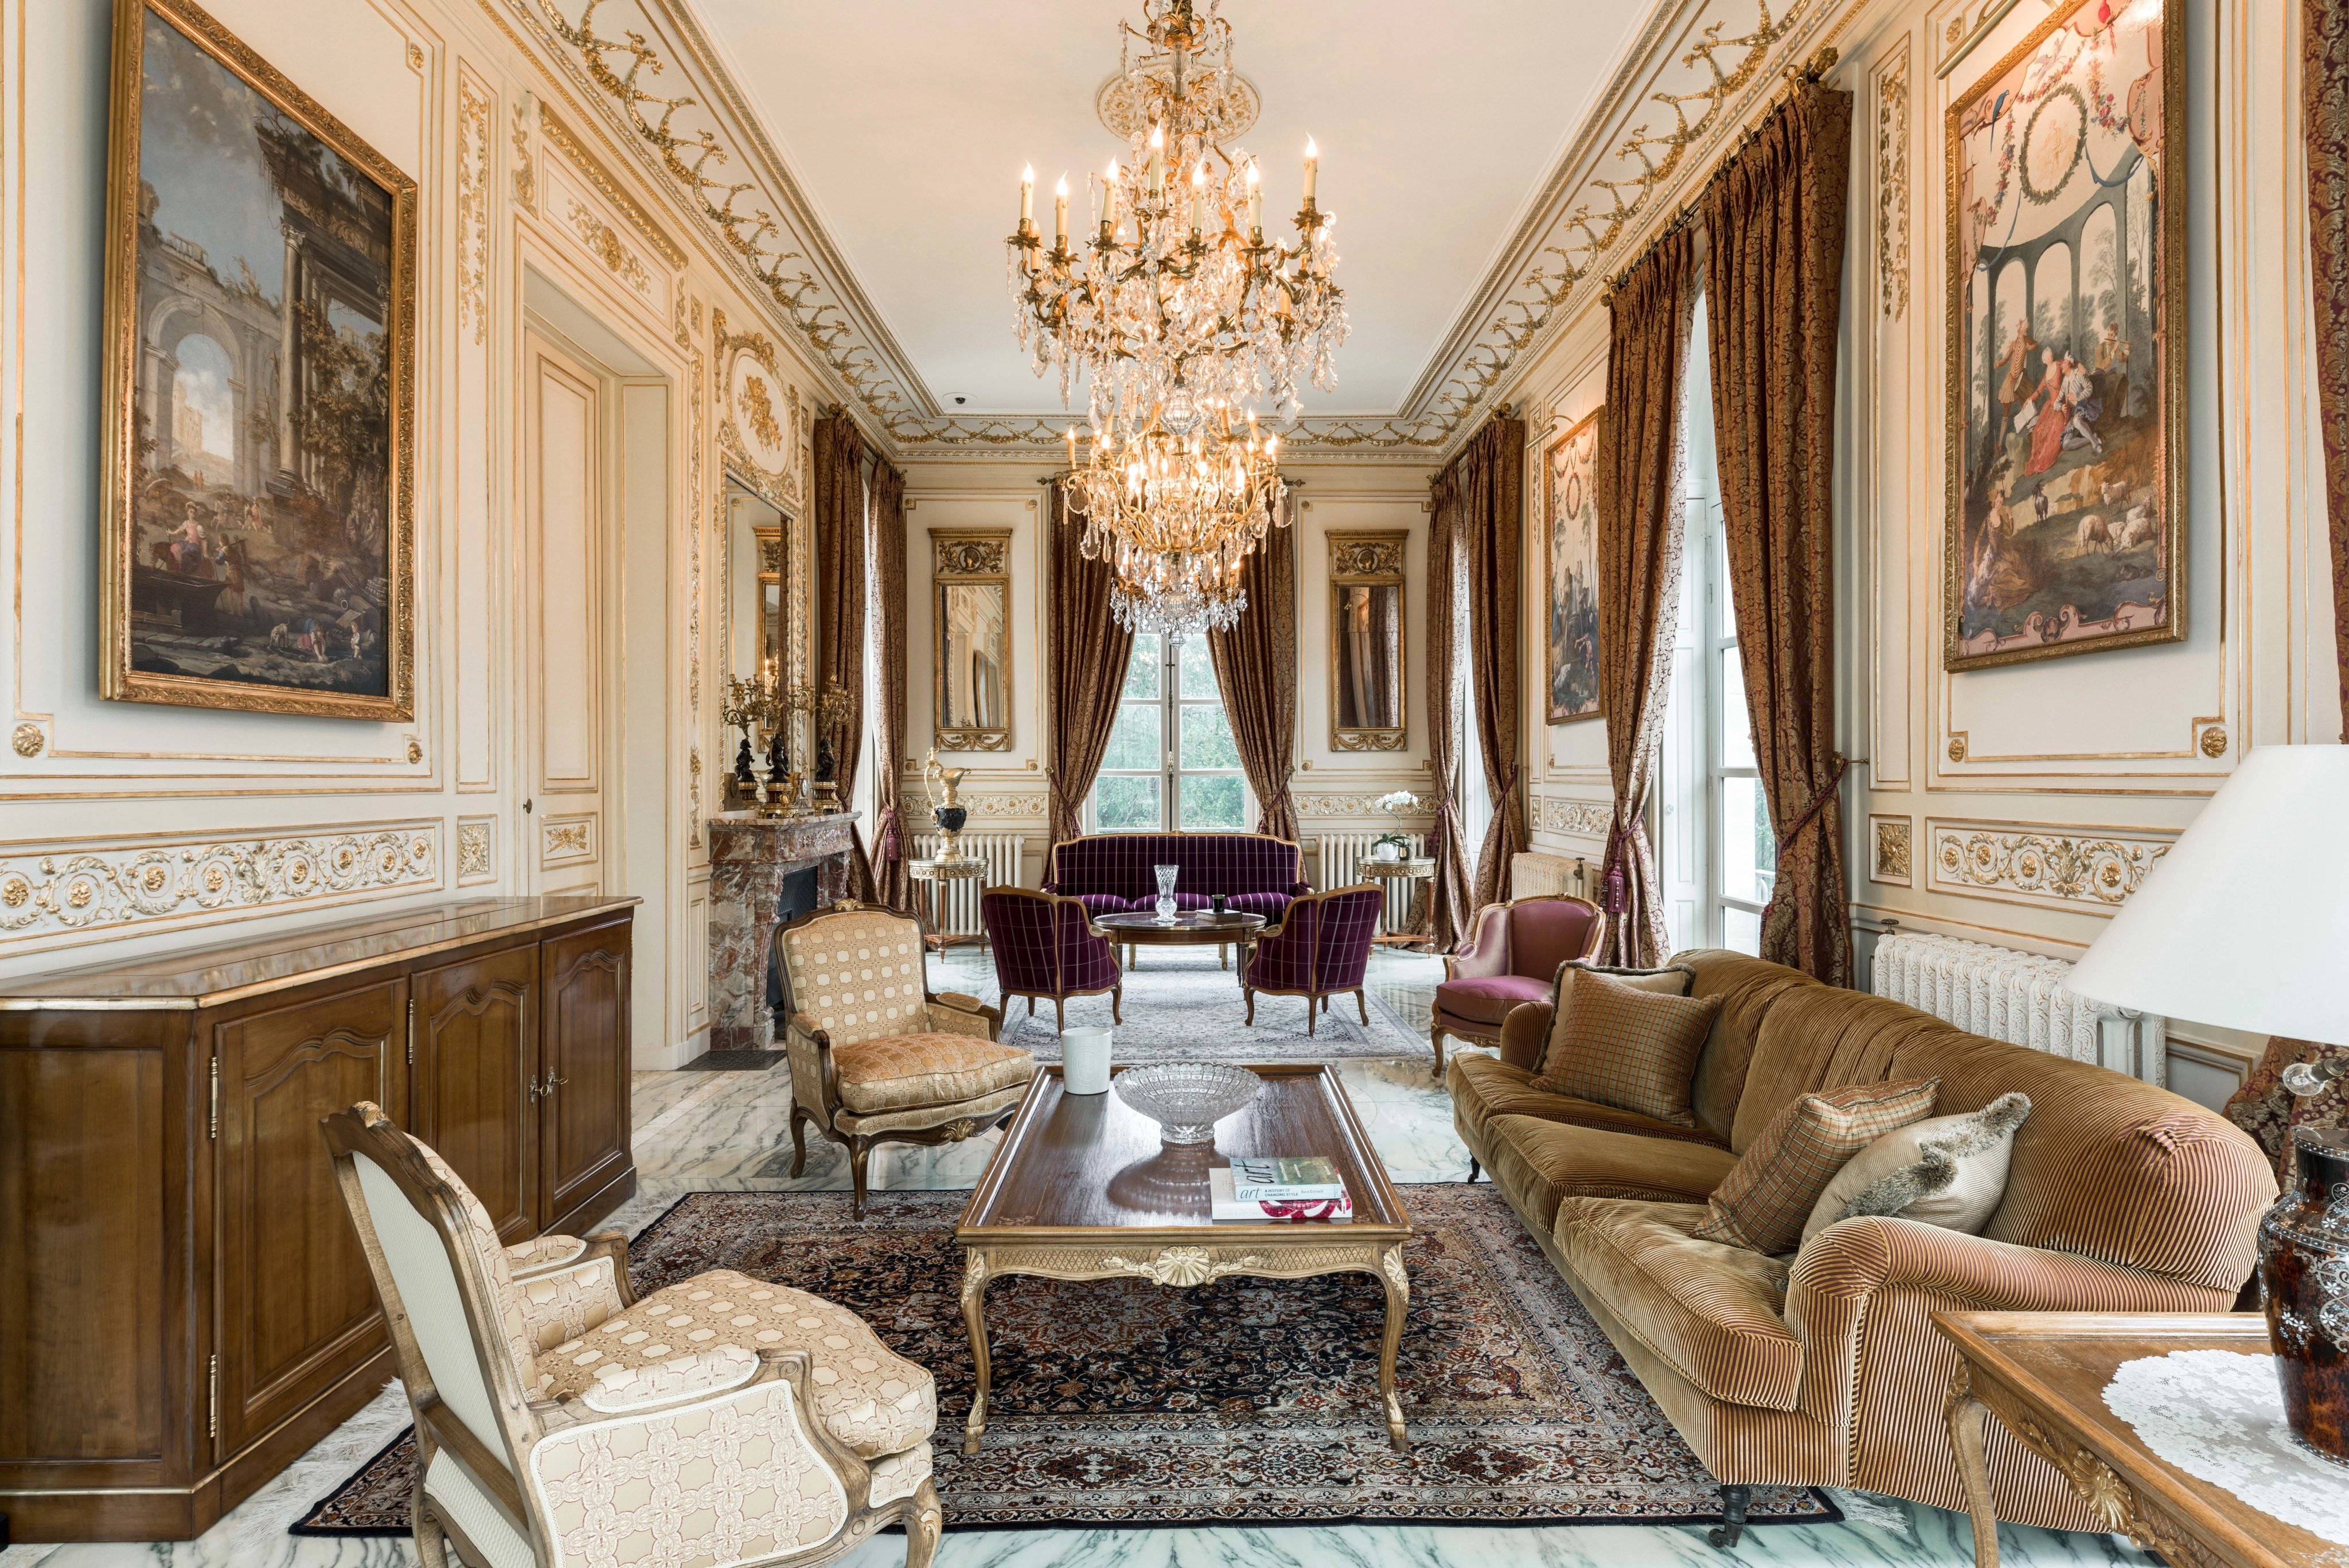 A sublime Palais inspired by Grand Trianon Palace, 20 min from Paris_1588